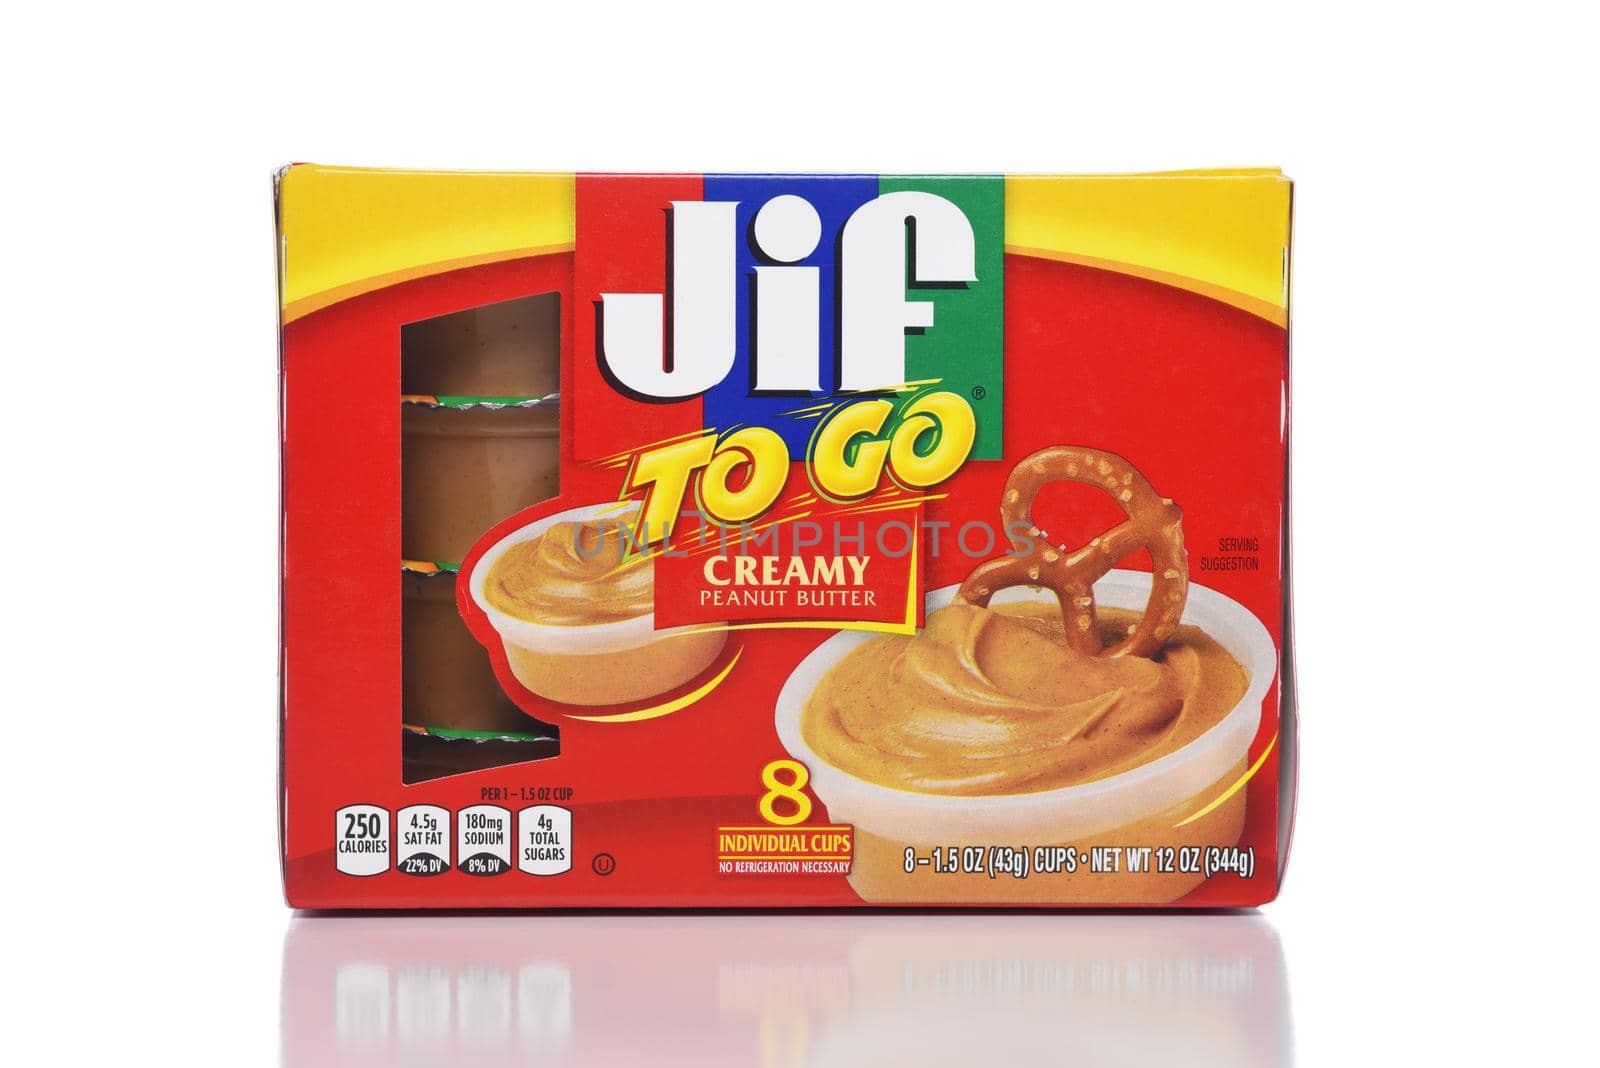 IRVINE, CALIFORNIA - 12 NOV 2020: An 8 count package of Jif To Go Creamy Penaut Butter.